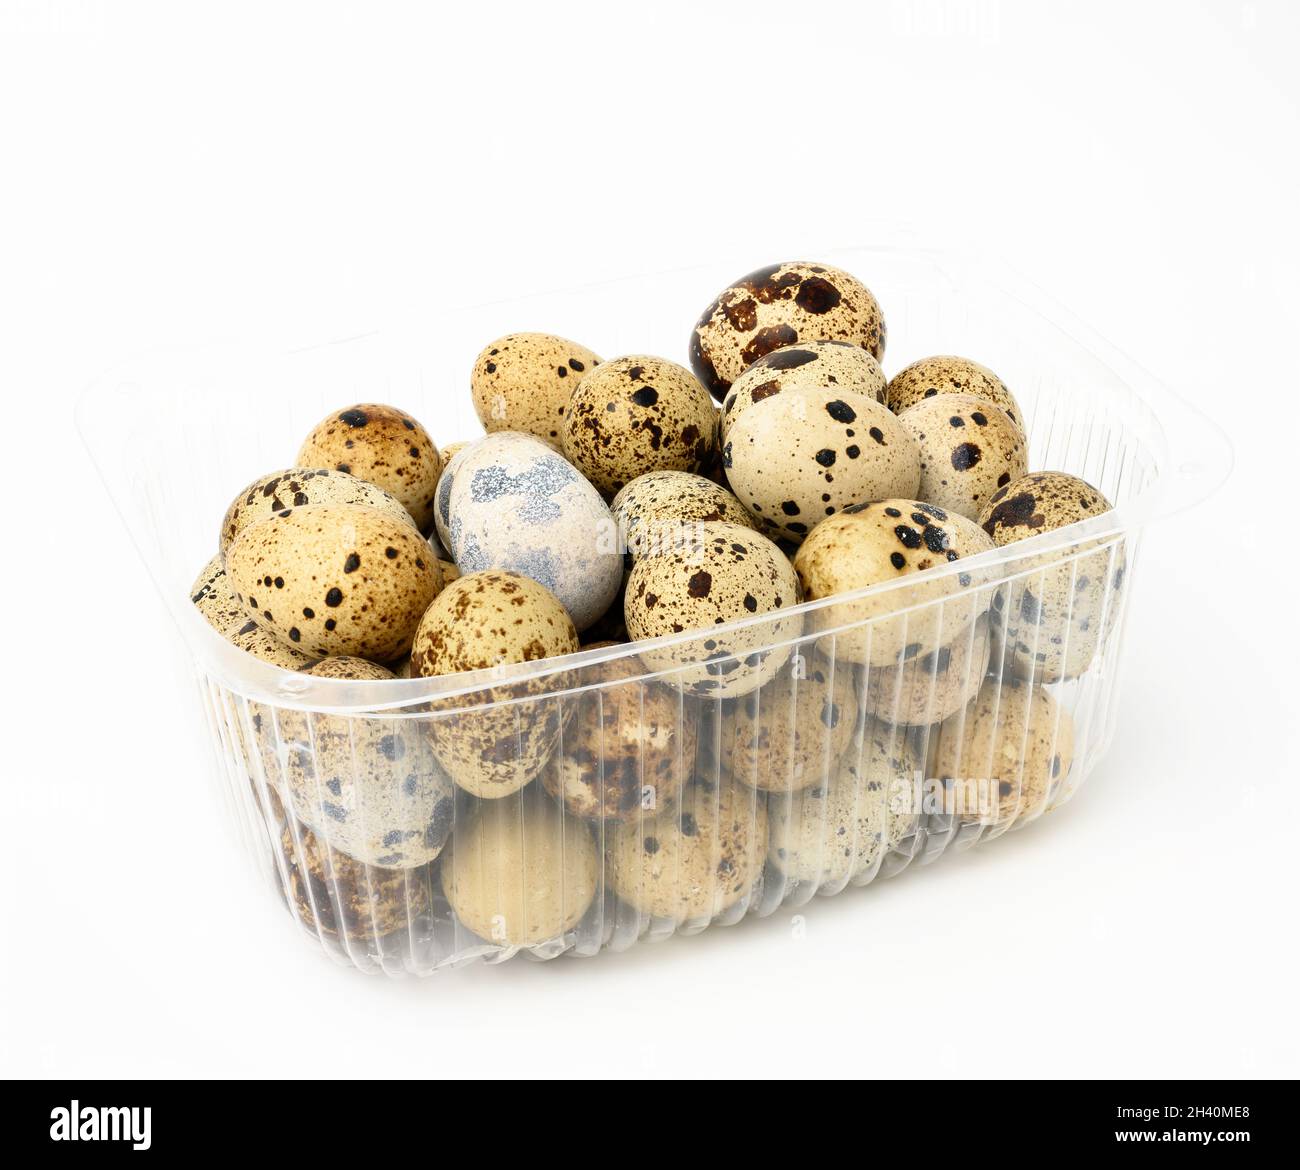 A bunch of raw quail eggs in a plastic transparent container on a white background, diet food Stock Photo